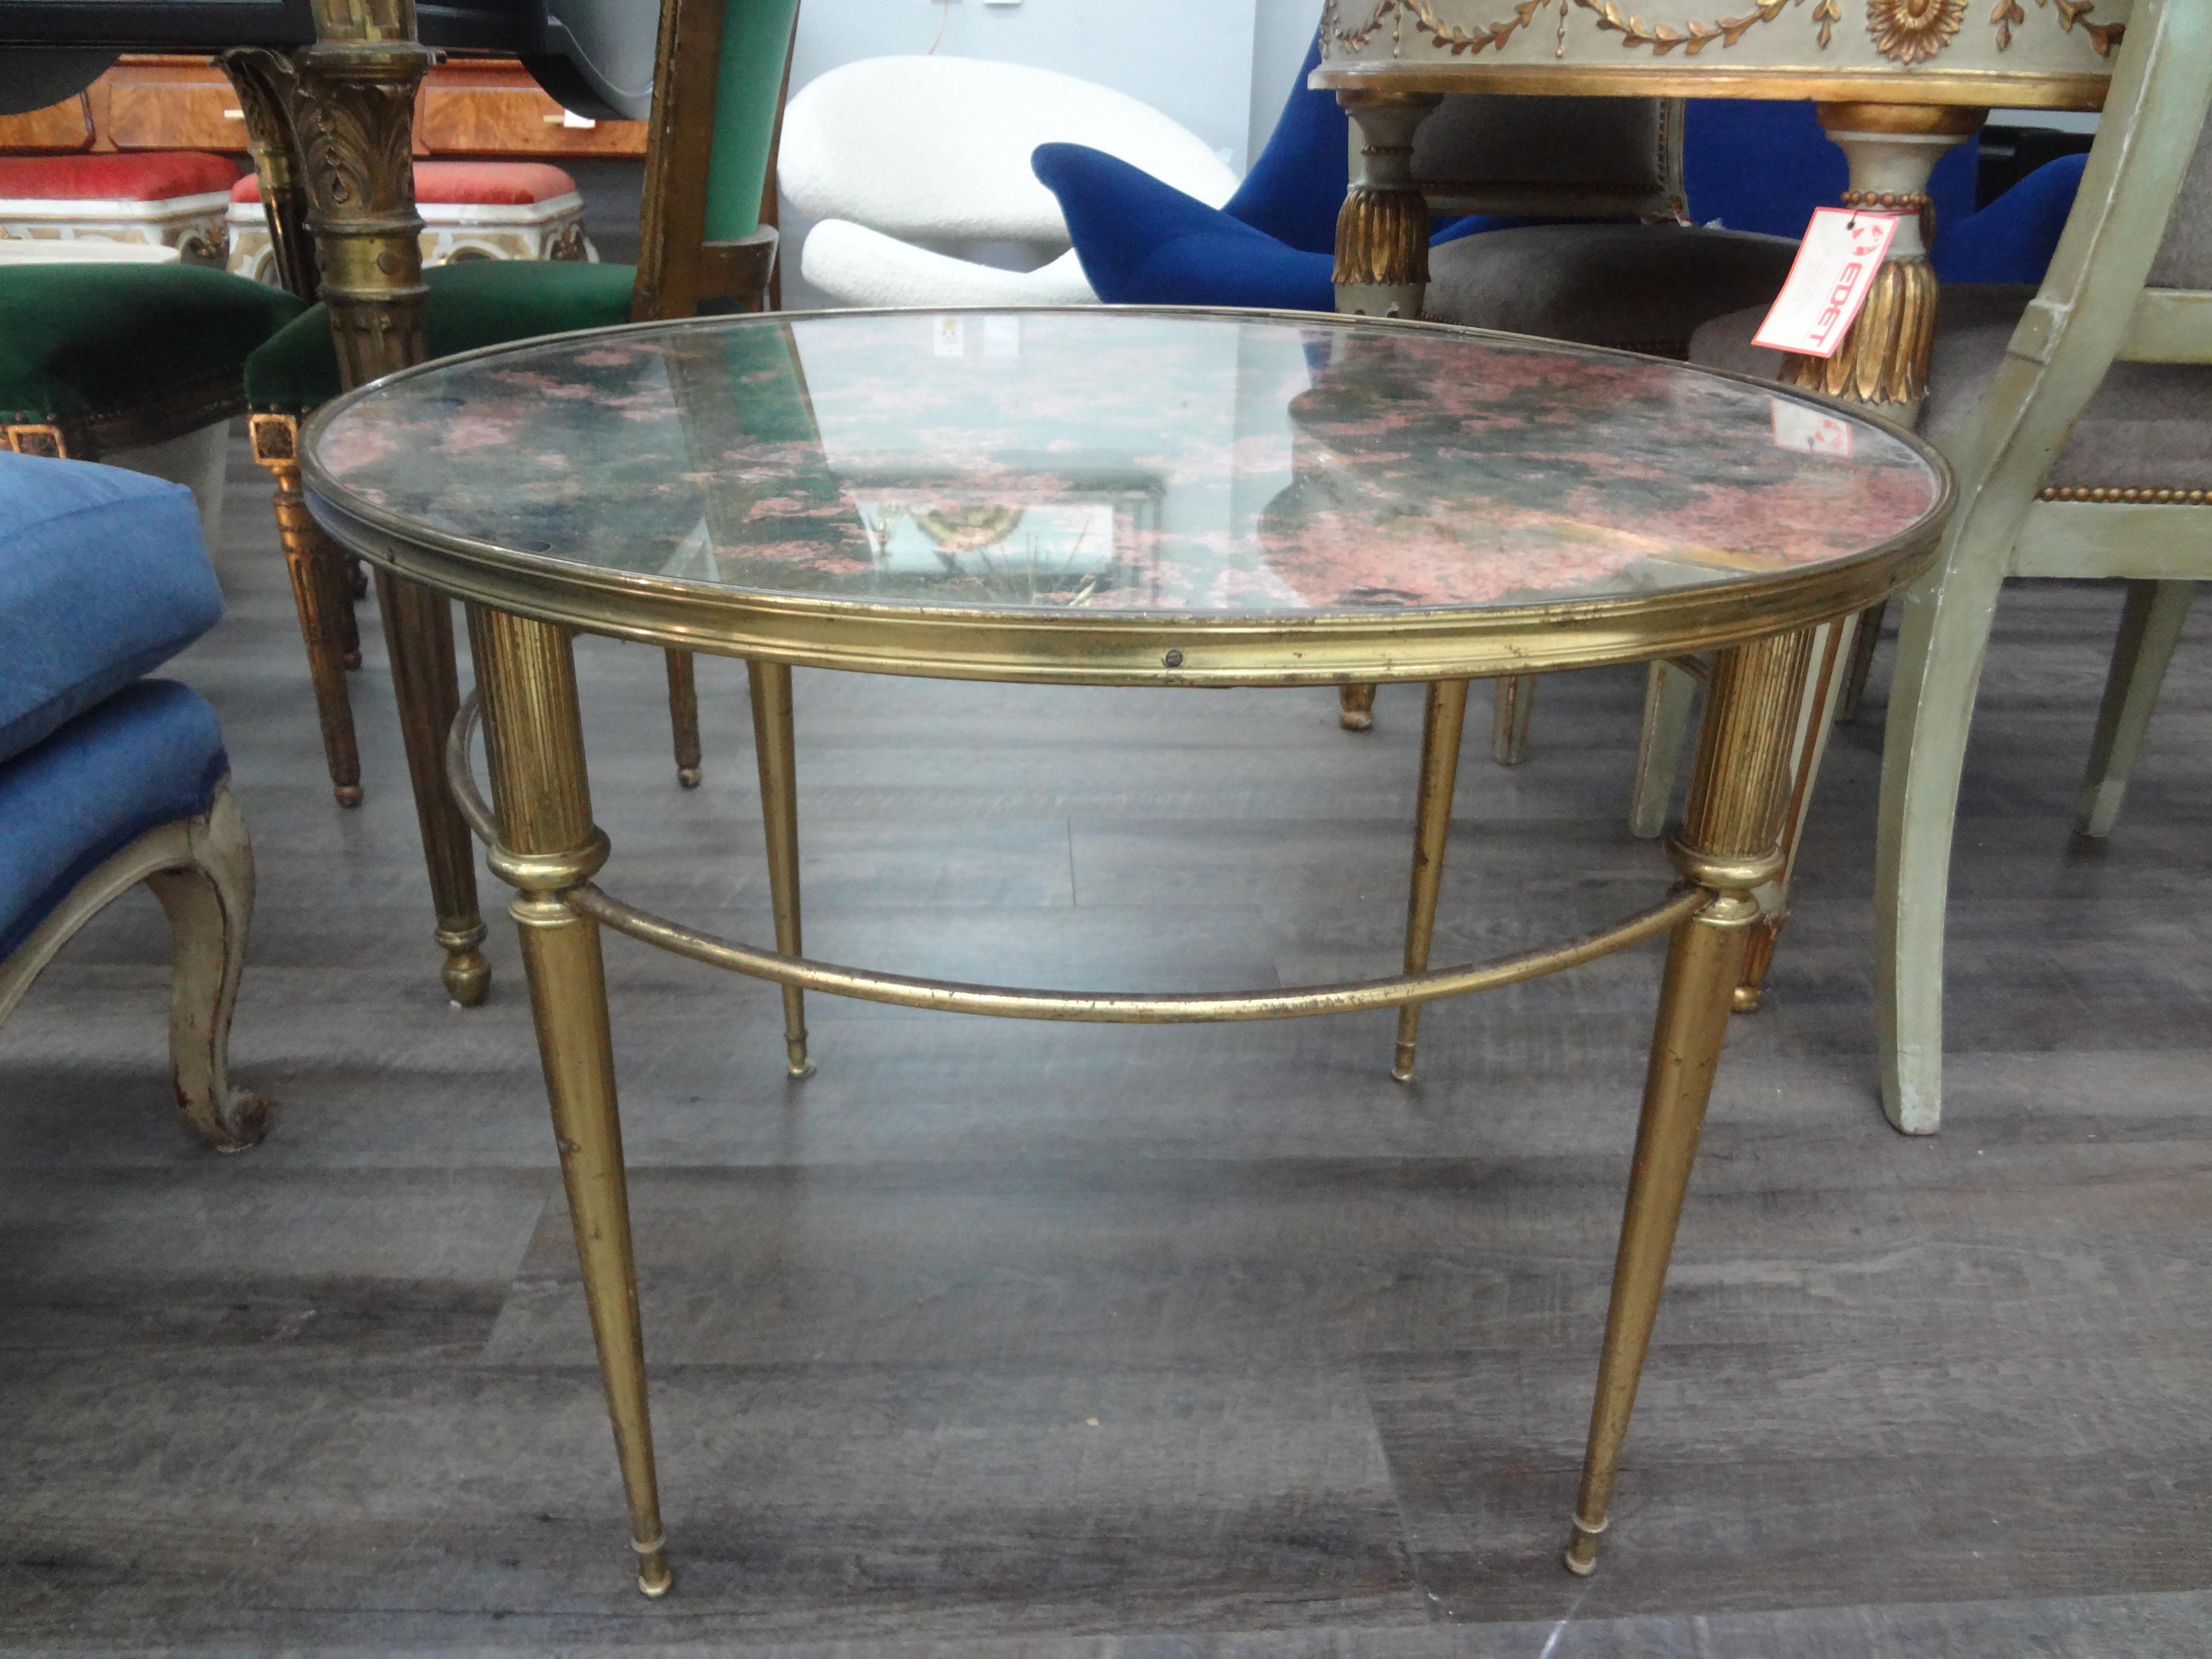 French Maison Bagues Louis XVI Style Cocktail Table
This stunning round French Baguès style coffee table or cocktail table has the most unusual eglomise glass top. This French Louis XVI style table could also be used as a side table or tea